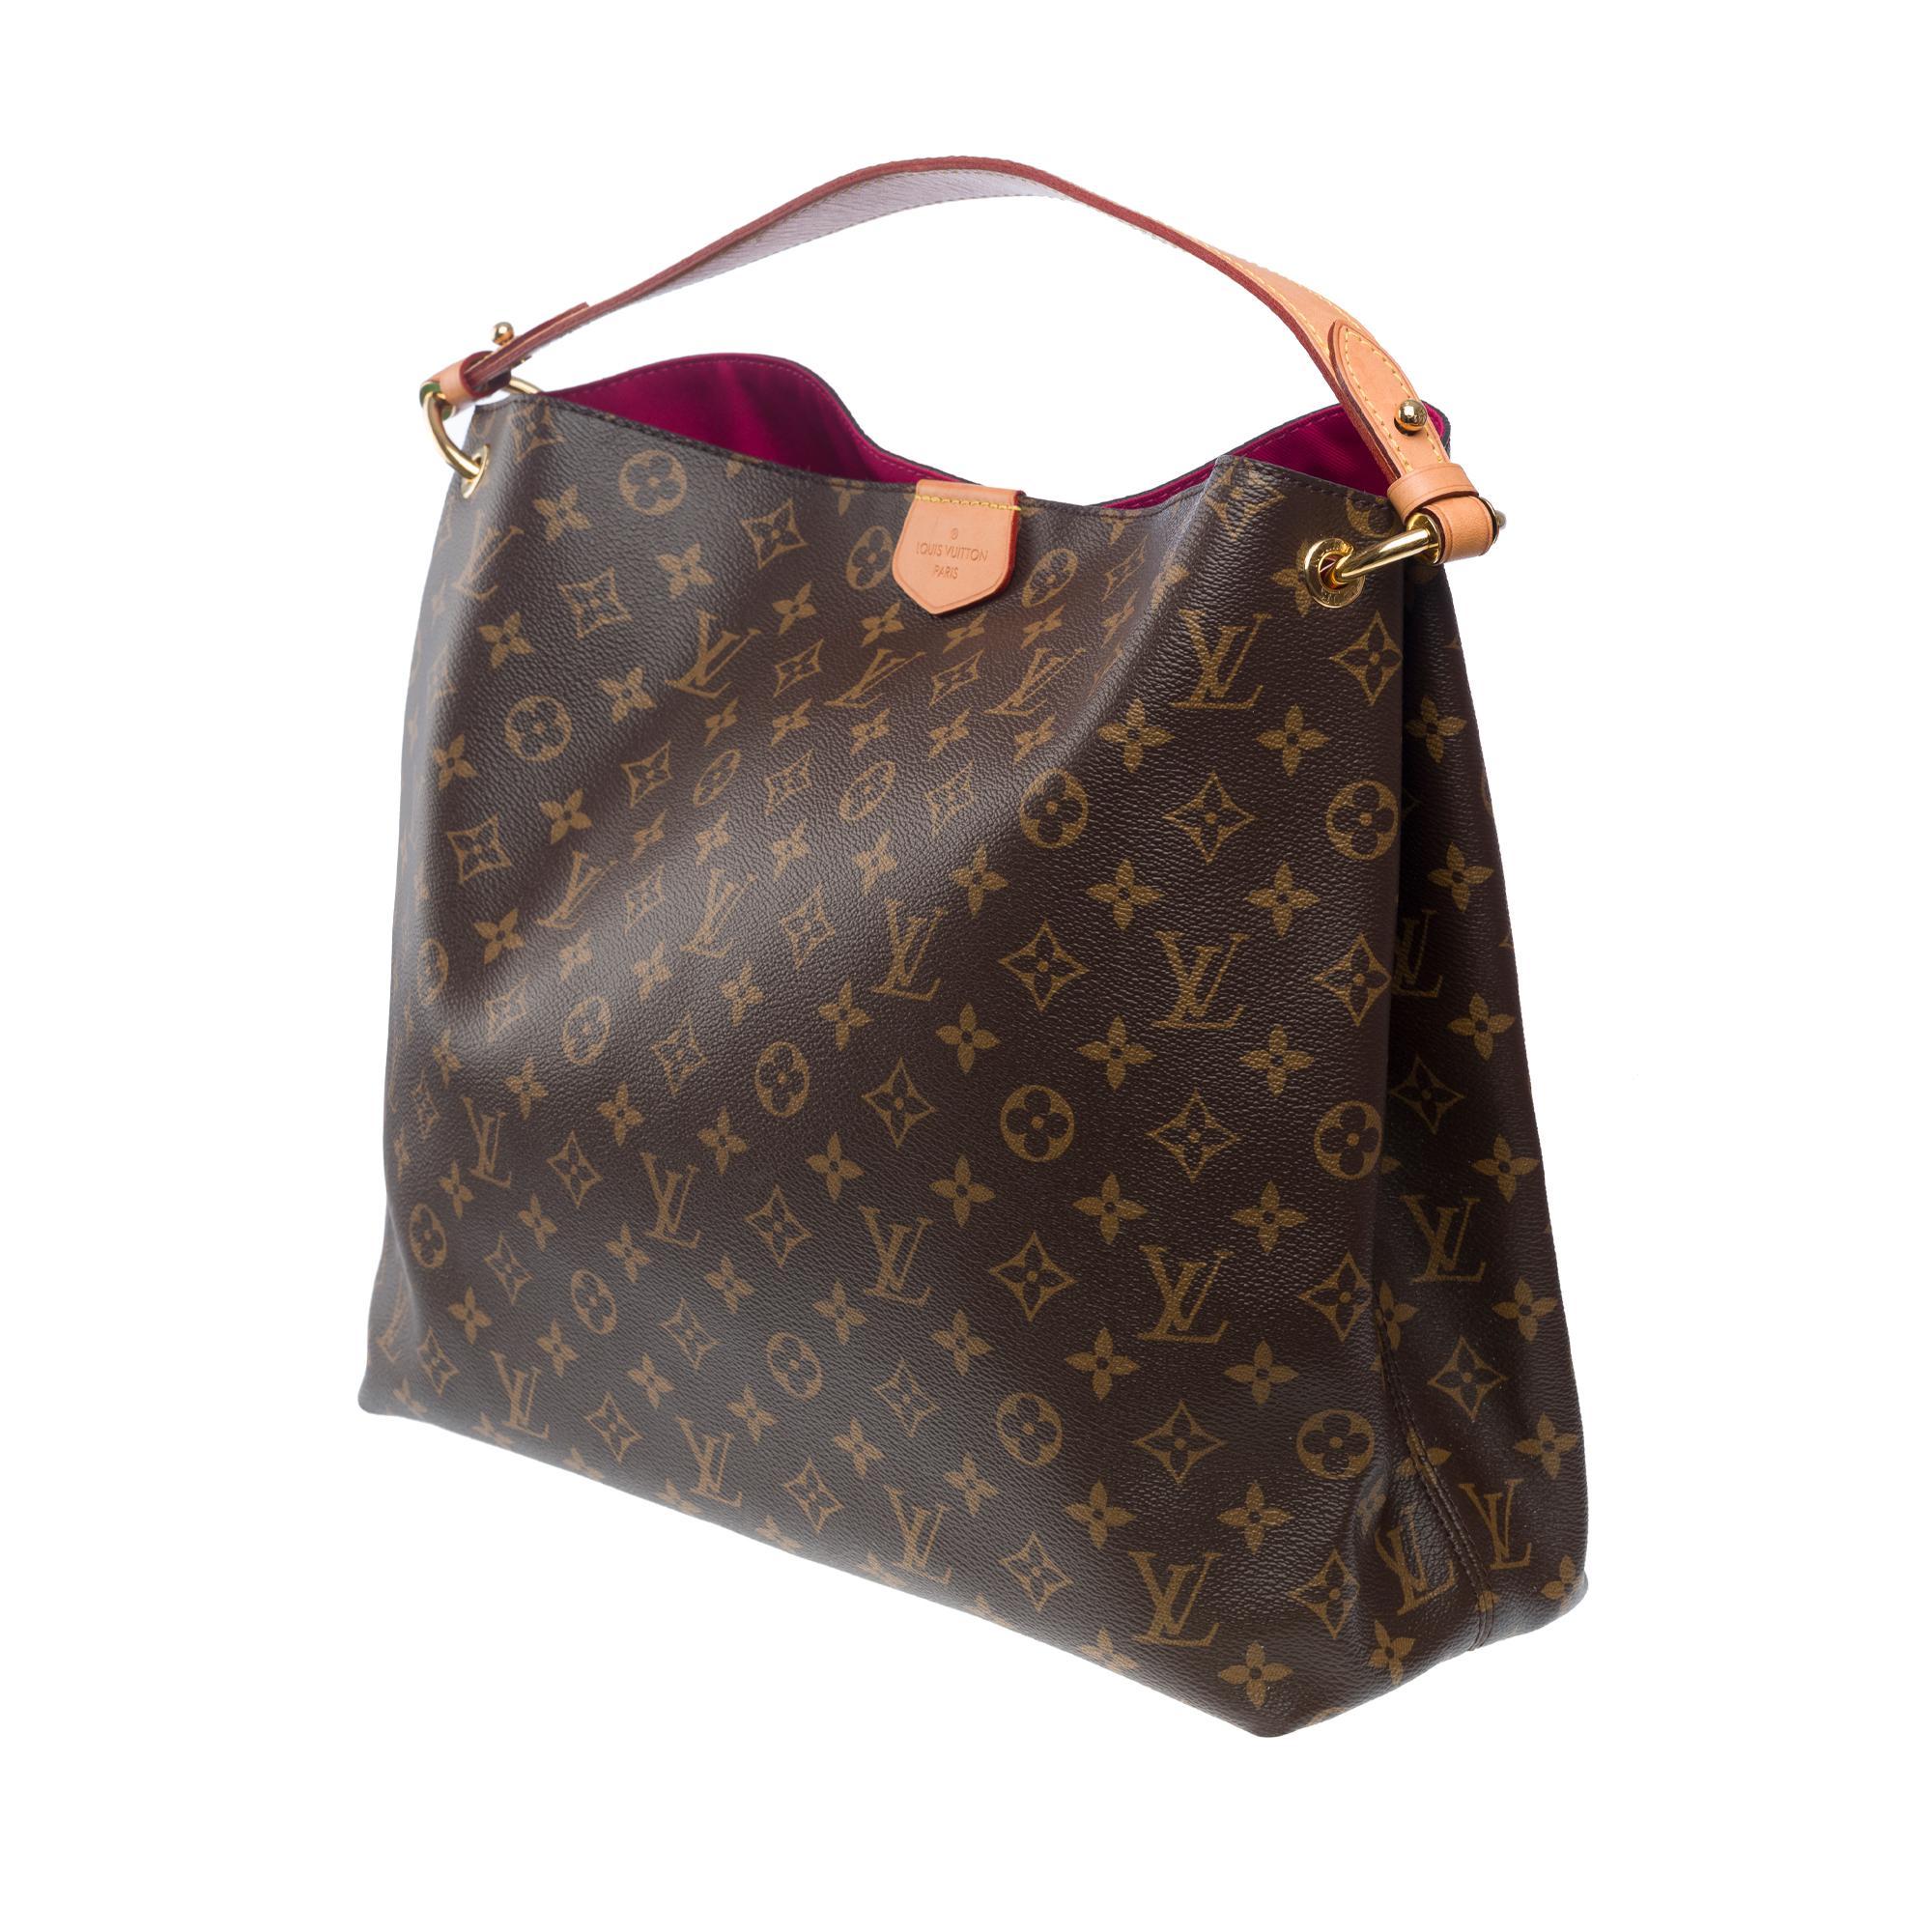 Louis Vuitton Graceful MM Tote bag in brown Monogram canvas, GHW For Sale 1